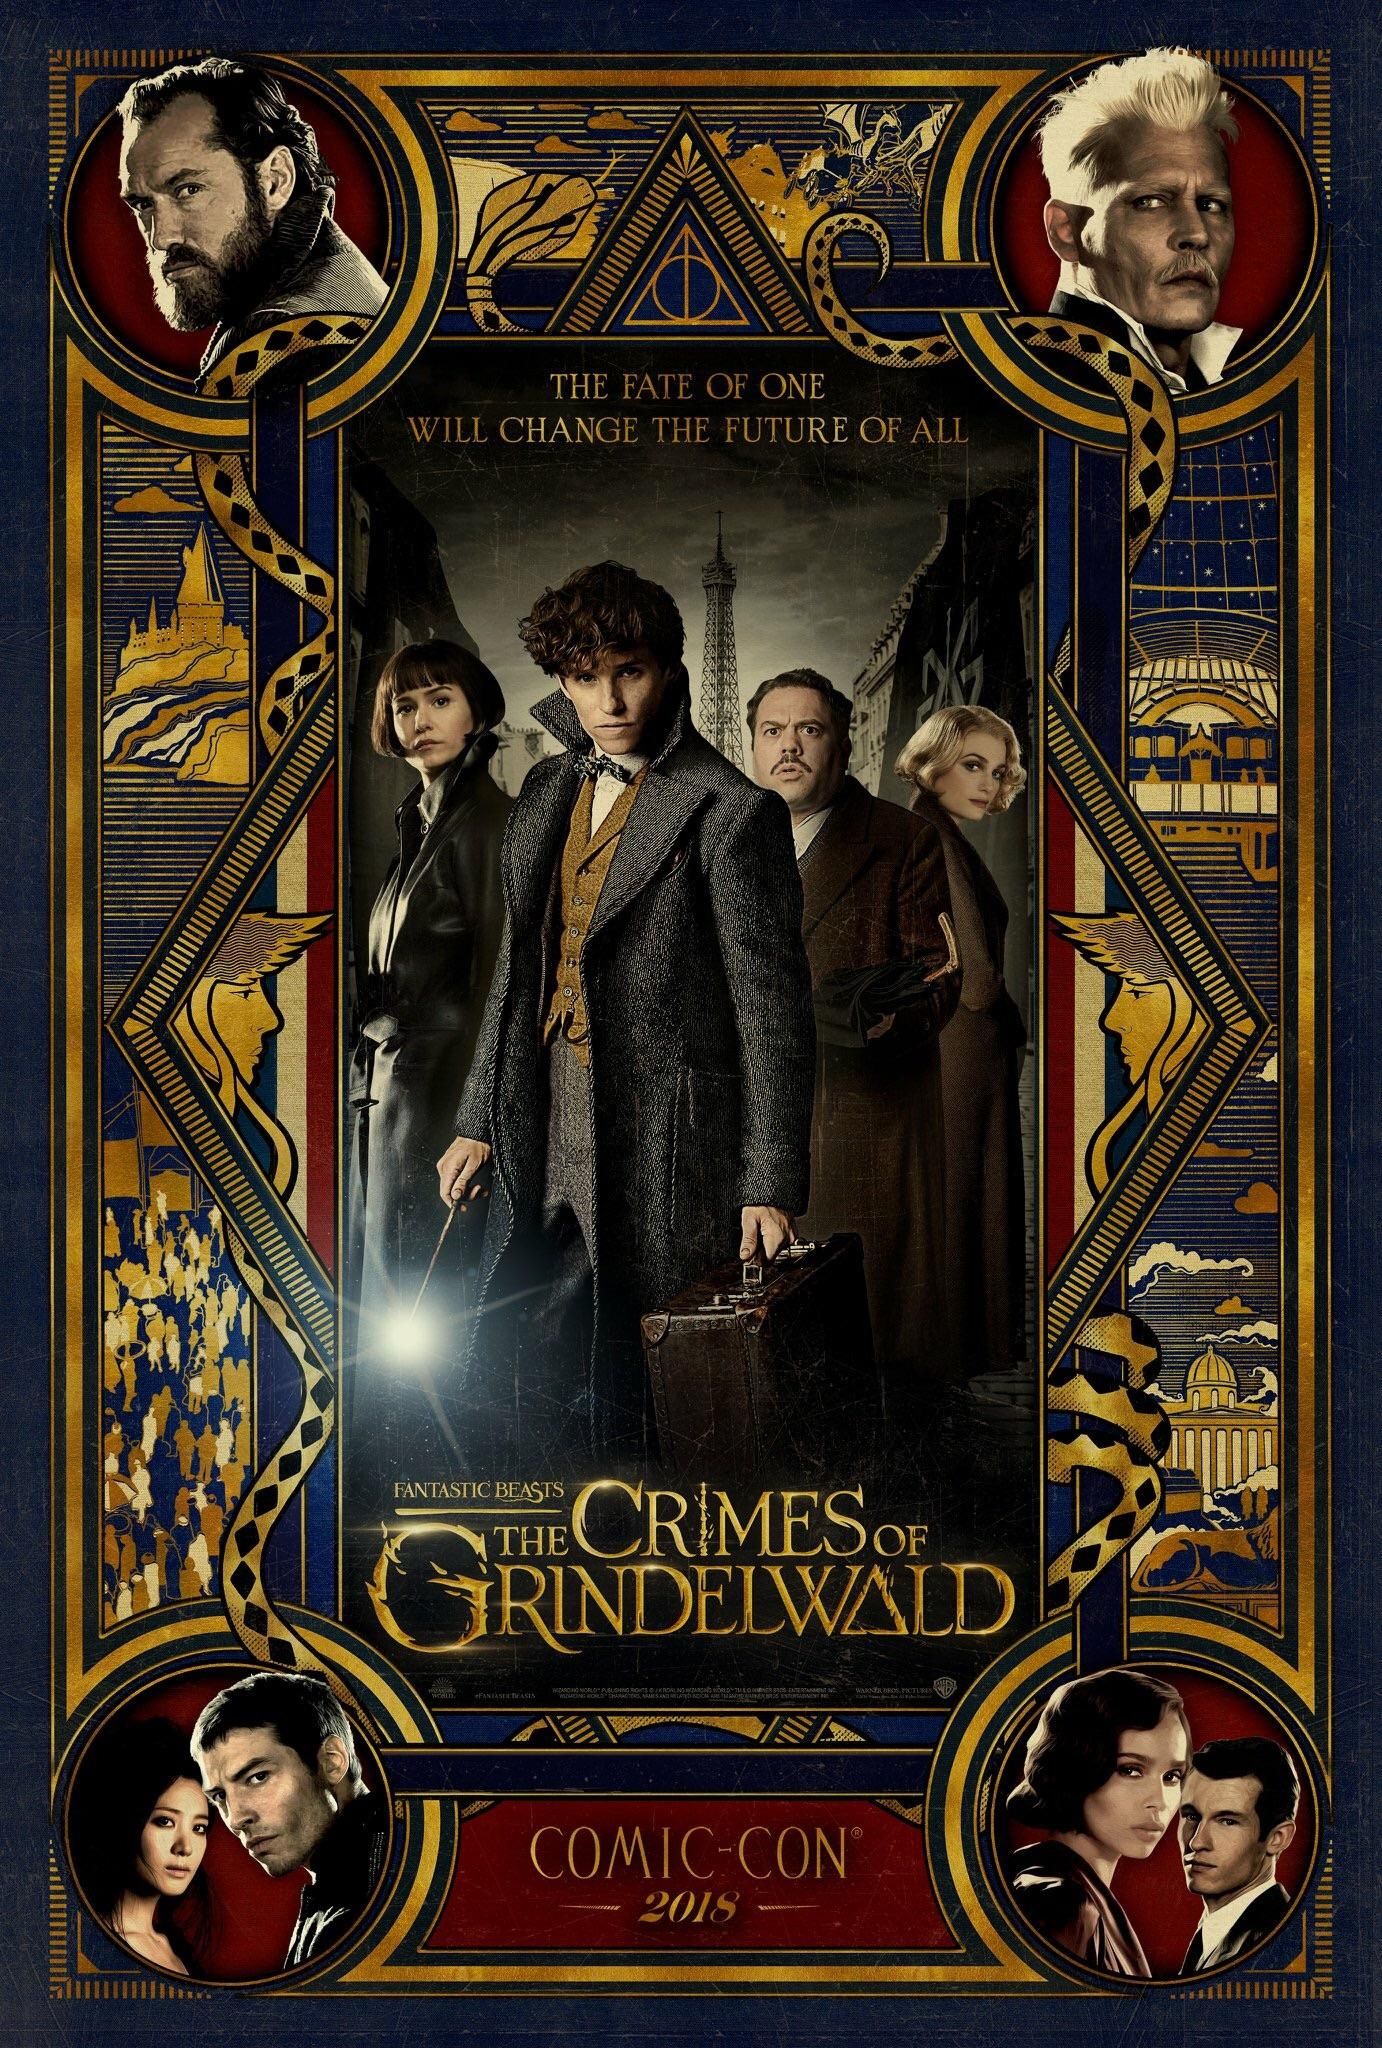 Fantastic Beasts: The Crimes Of Grindelwald Poster Teases Comic-Con Trailer